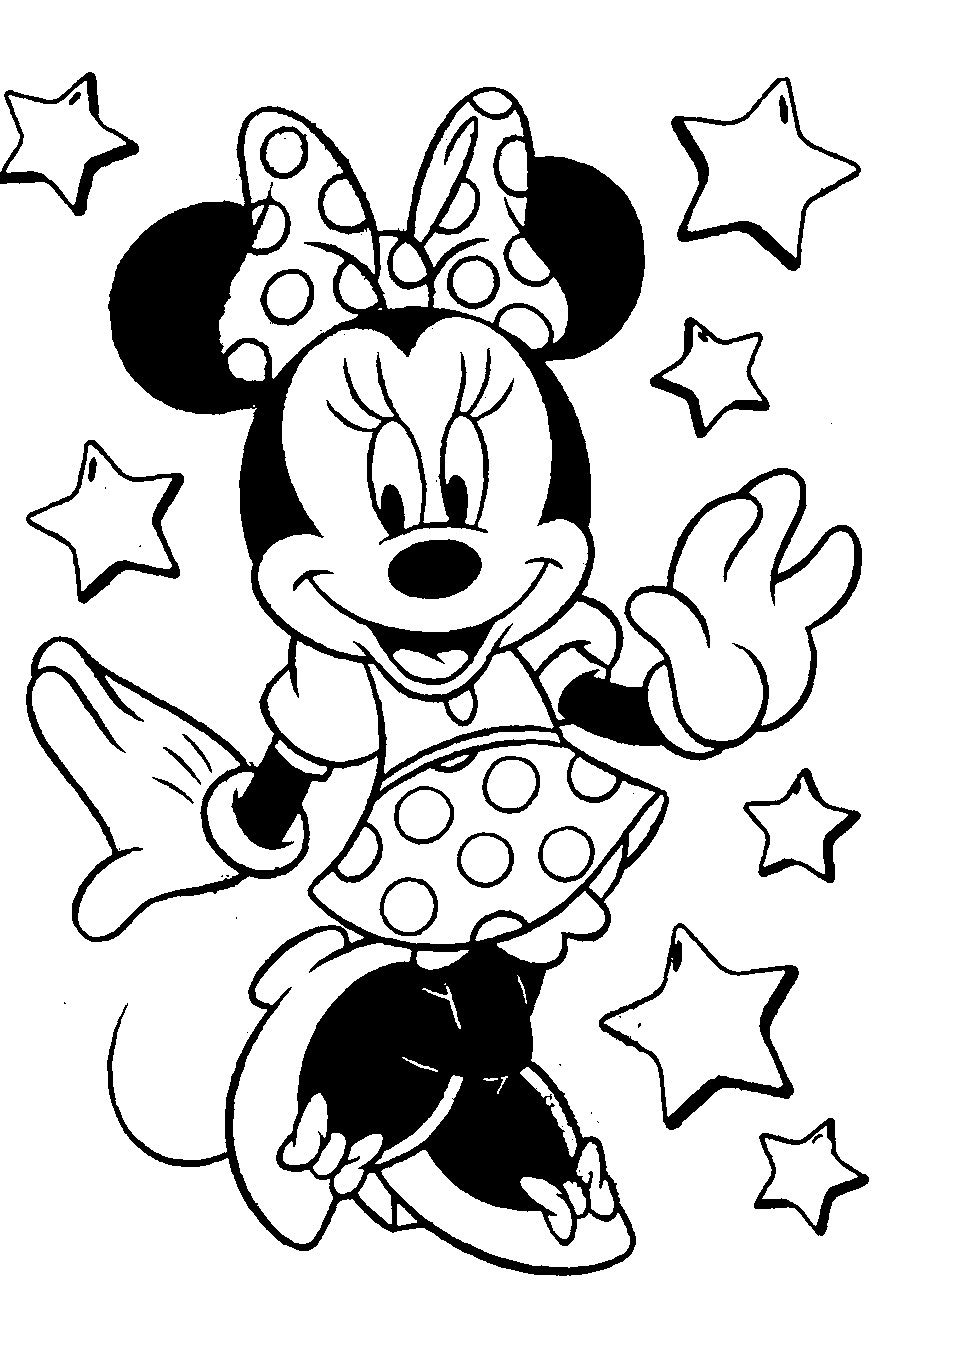 Free Printable Minnie Mouse Coloring Pages
 DISNEY COLORING PAGES